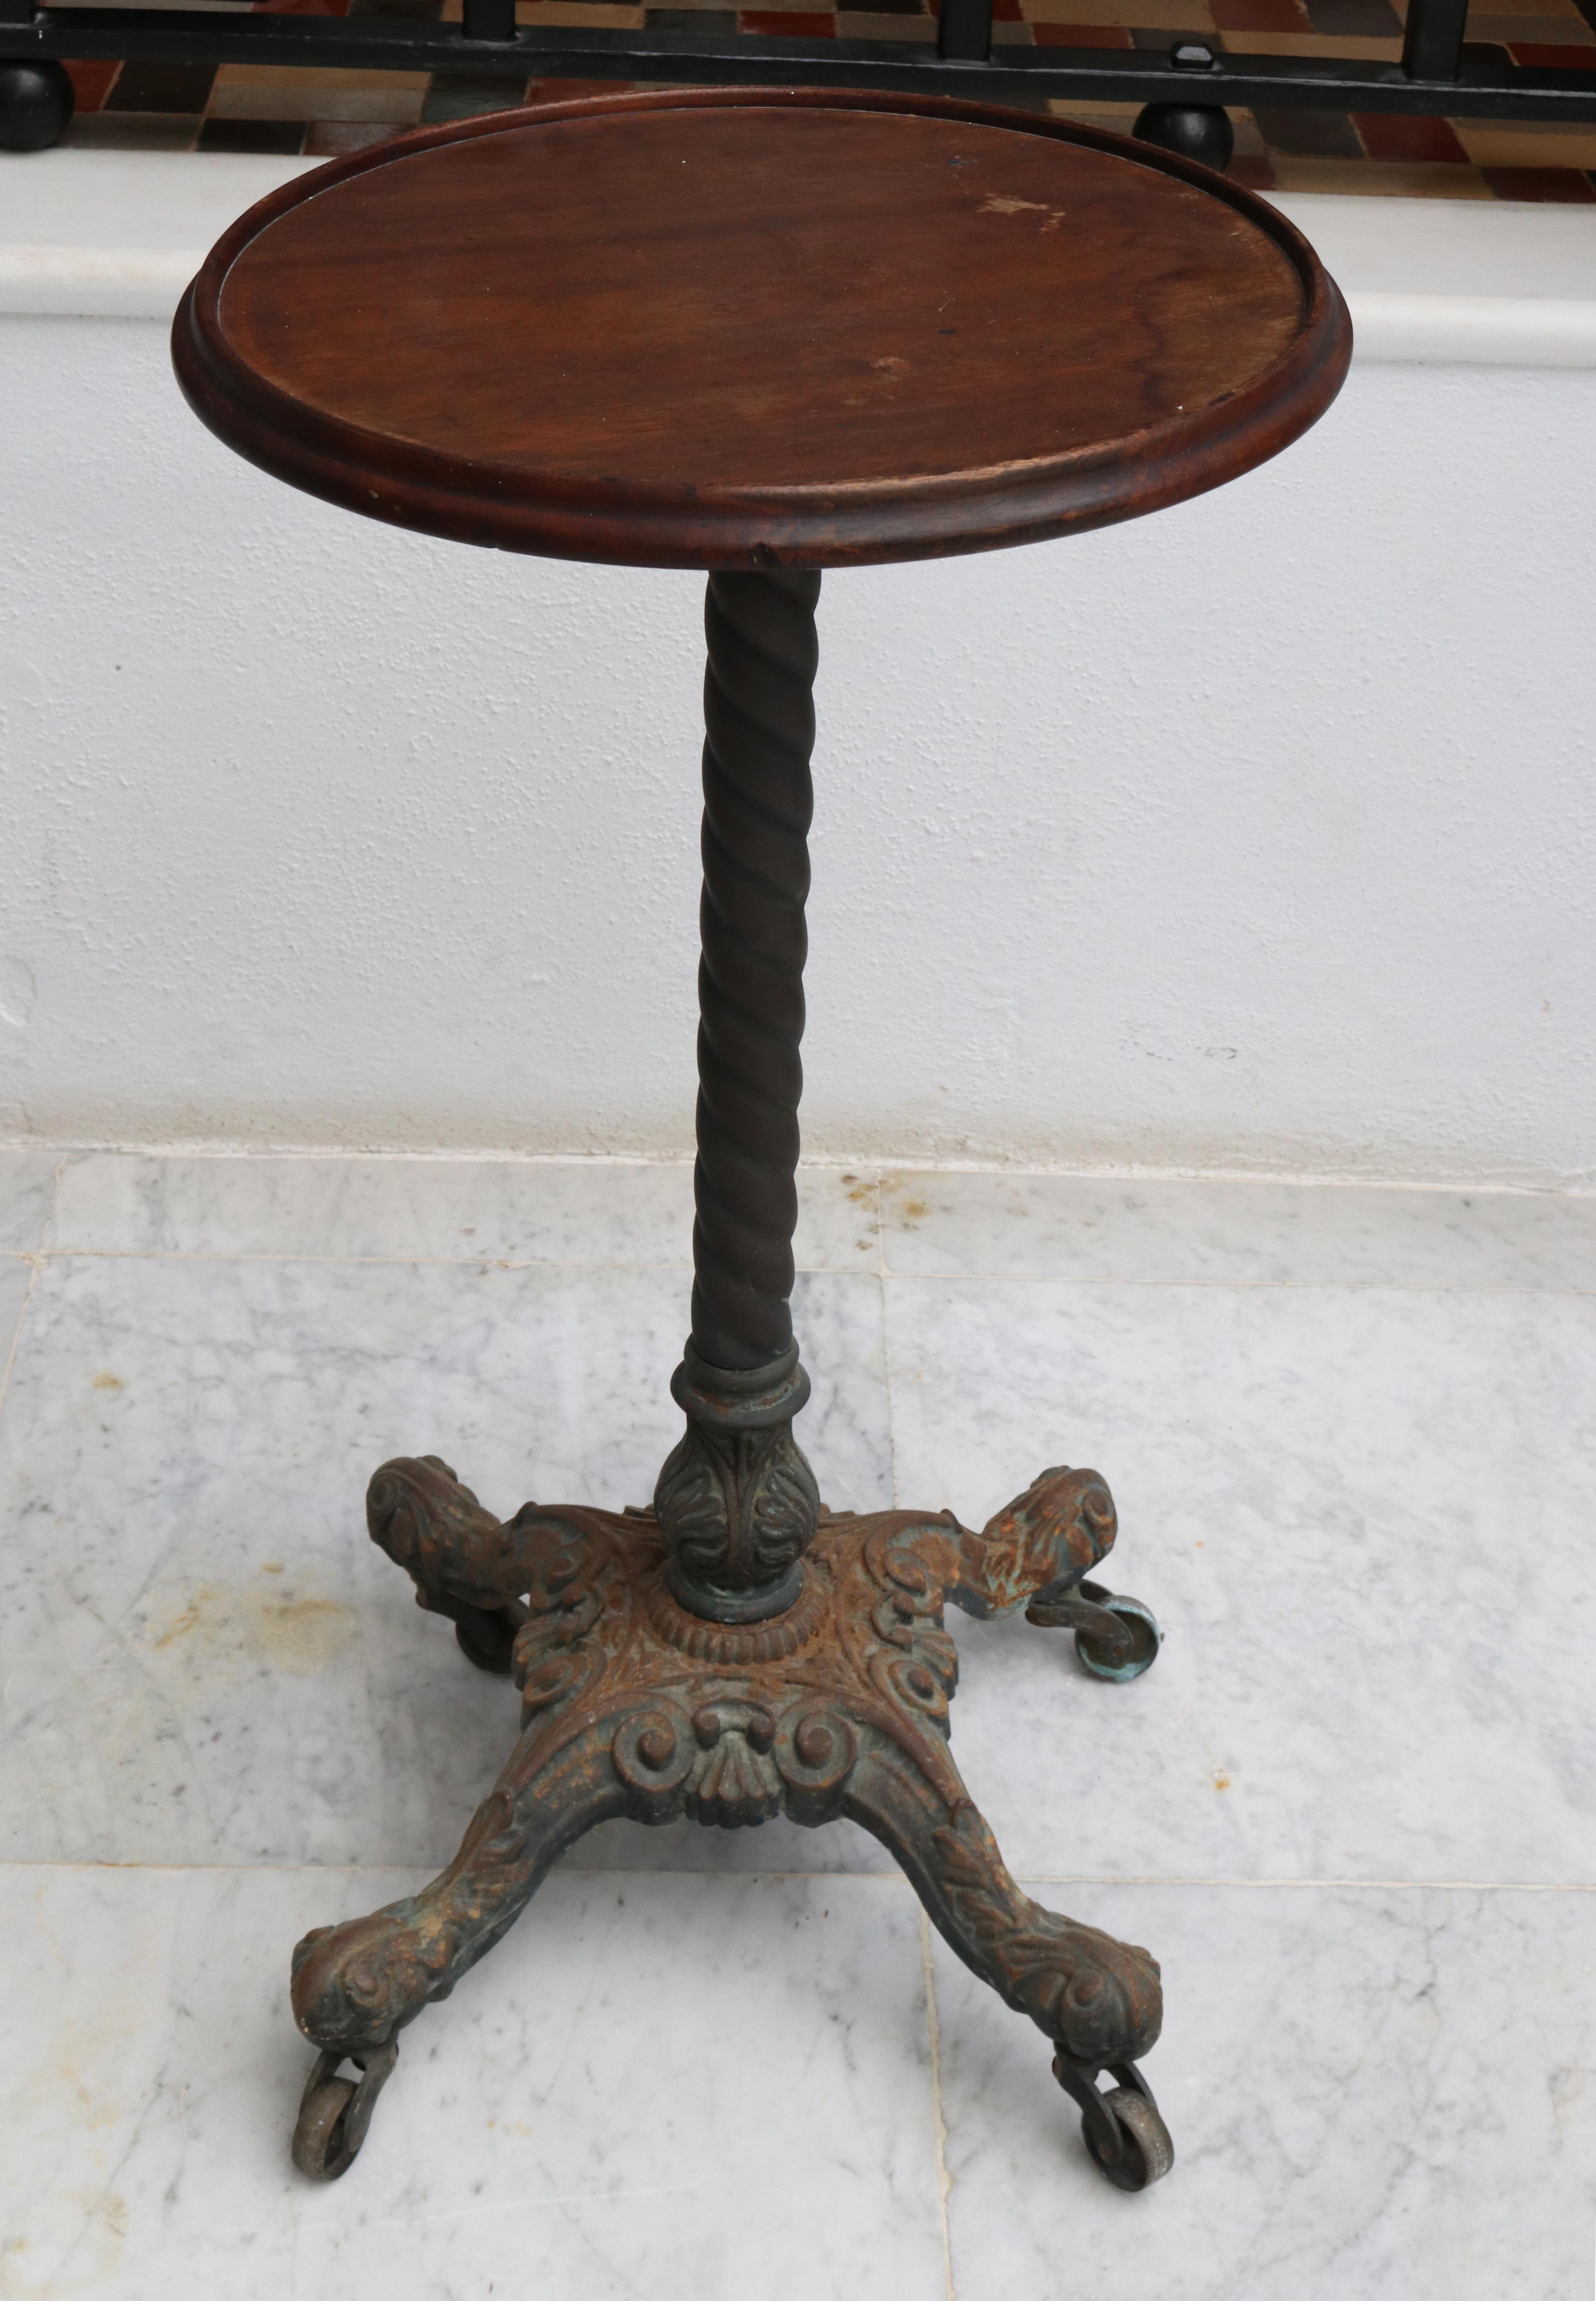 19th century English pedestal side table with wooden top and cast iron foot claw with four wheels.